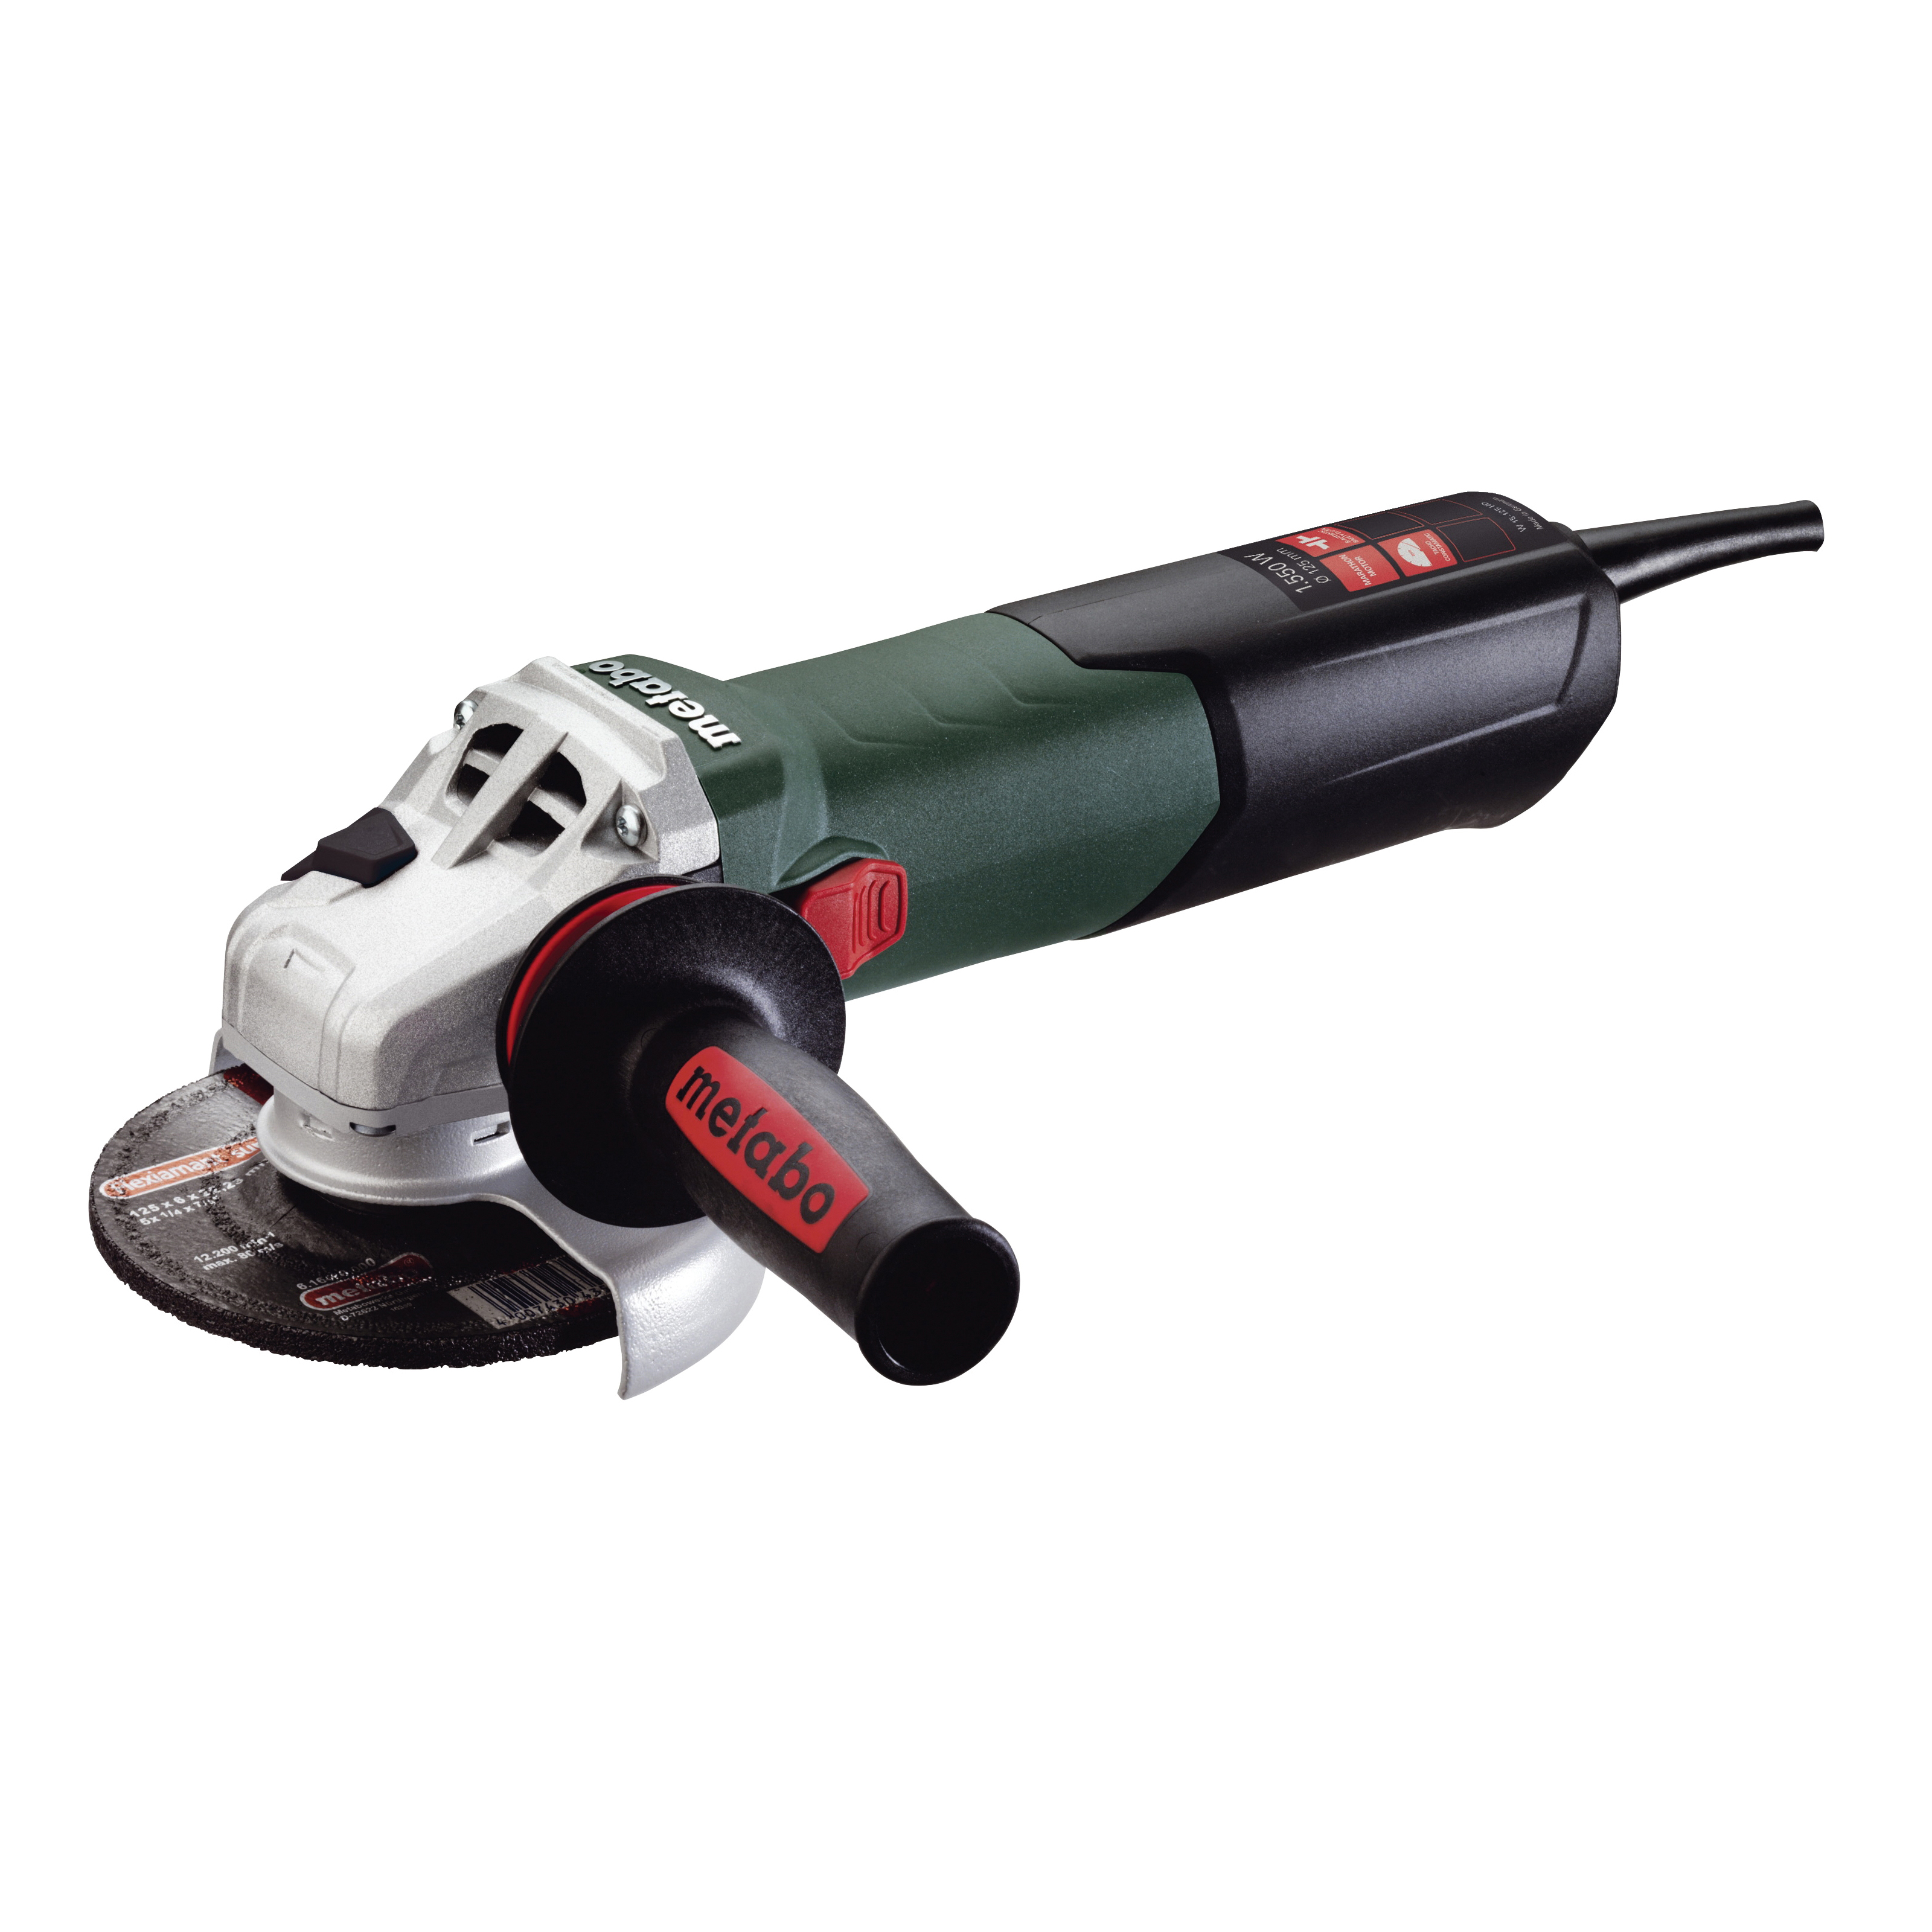 metabo® 600464420 Electric Angle Grinder, 6 in Dia Wheel, 5/8-11 UNC Arbor/Shank, 110 to 120 VAC